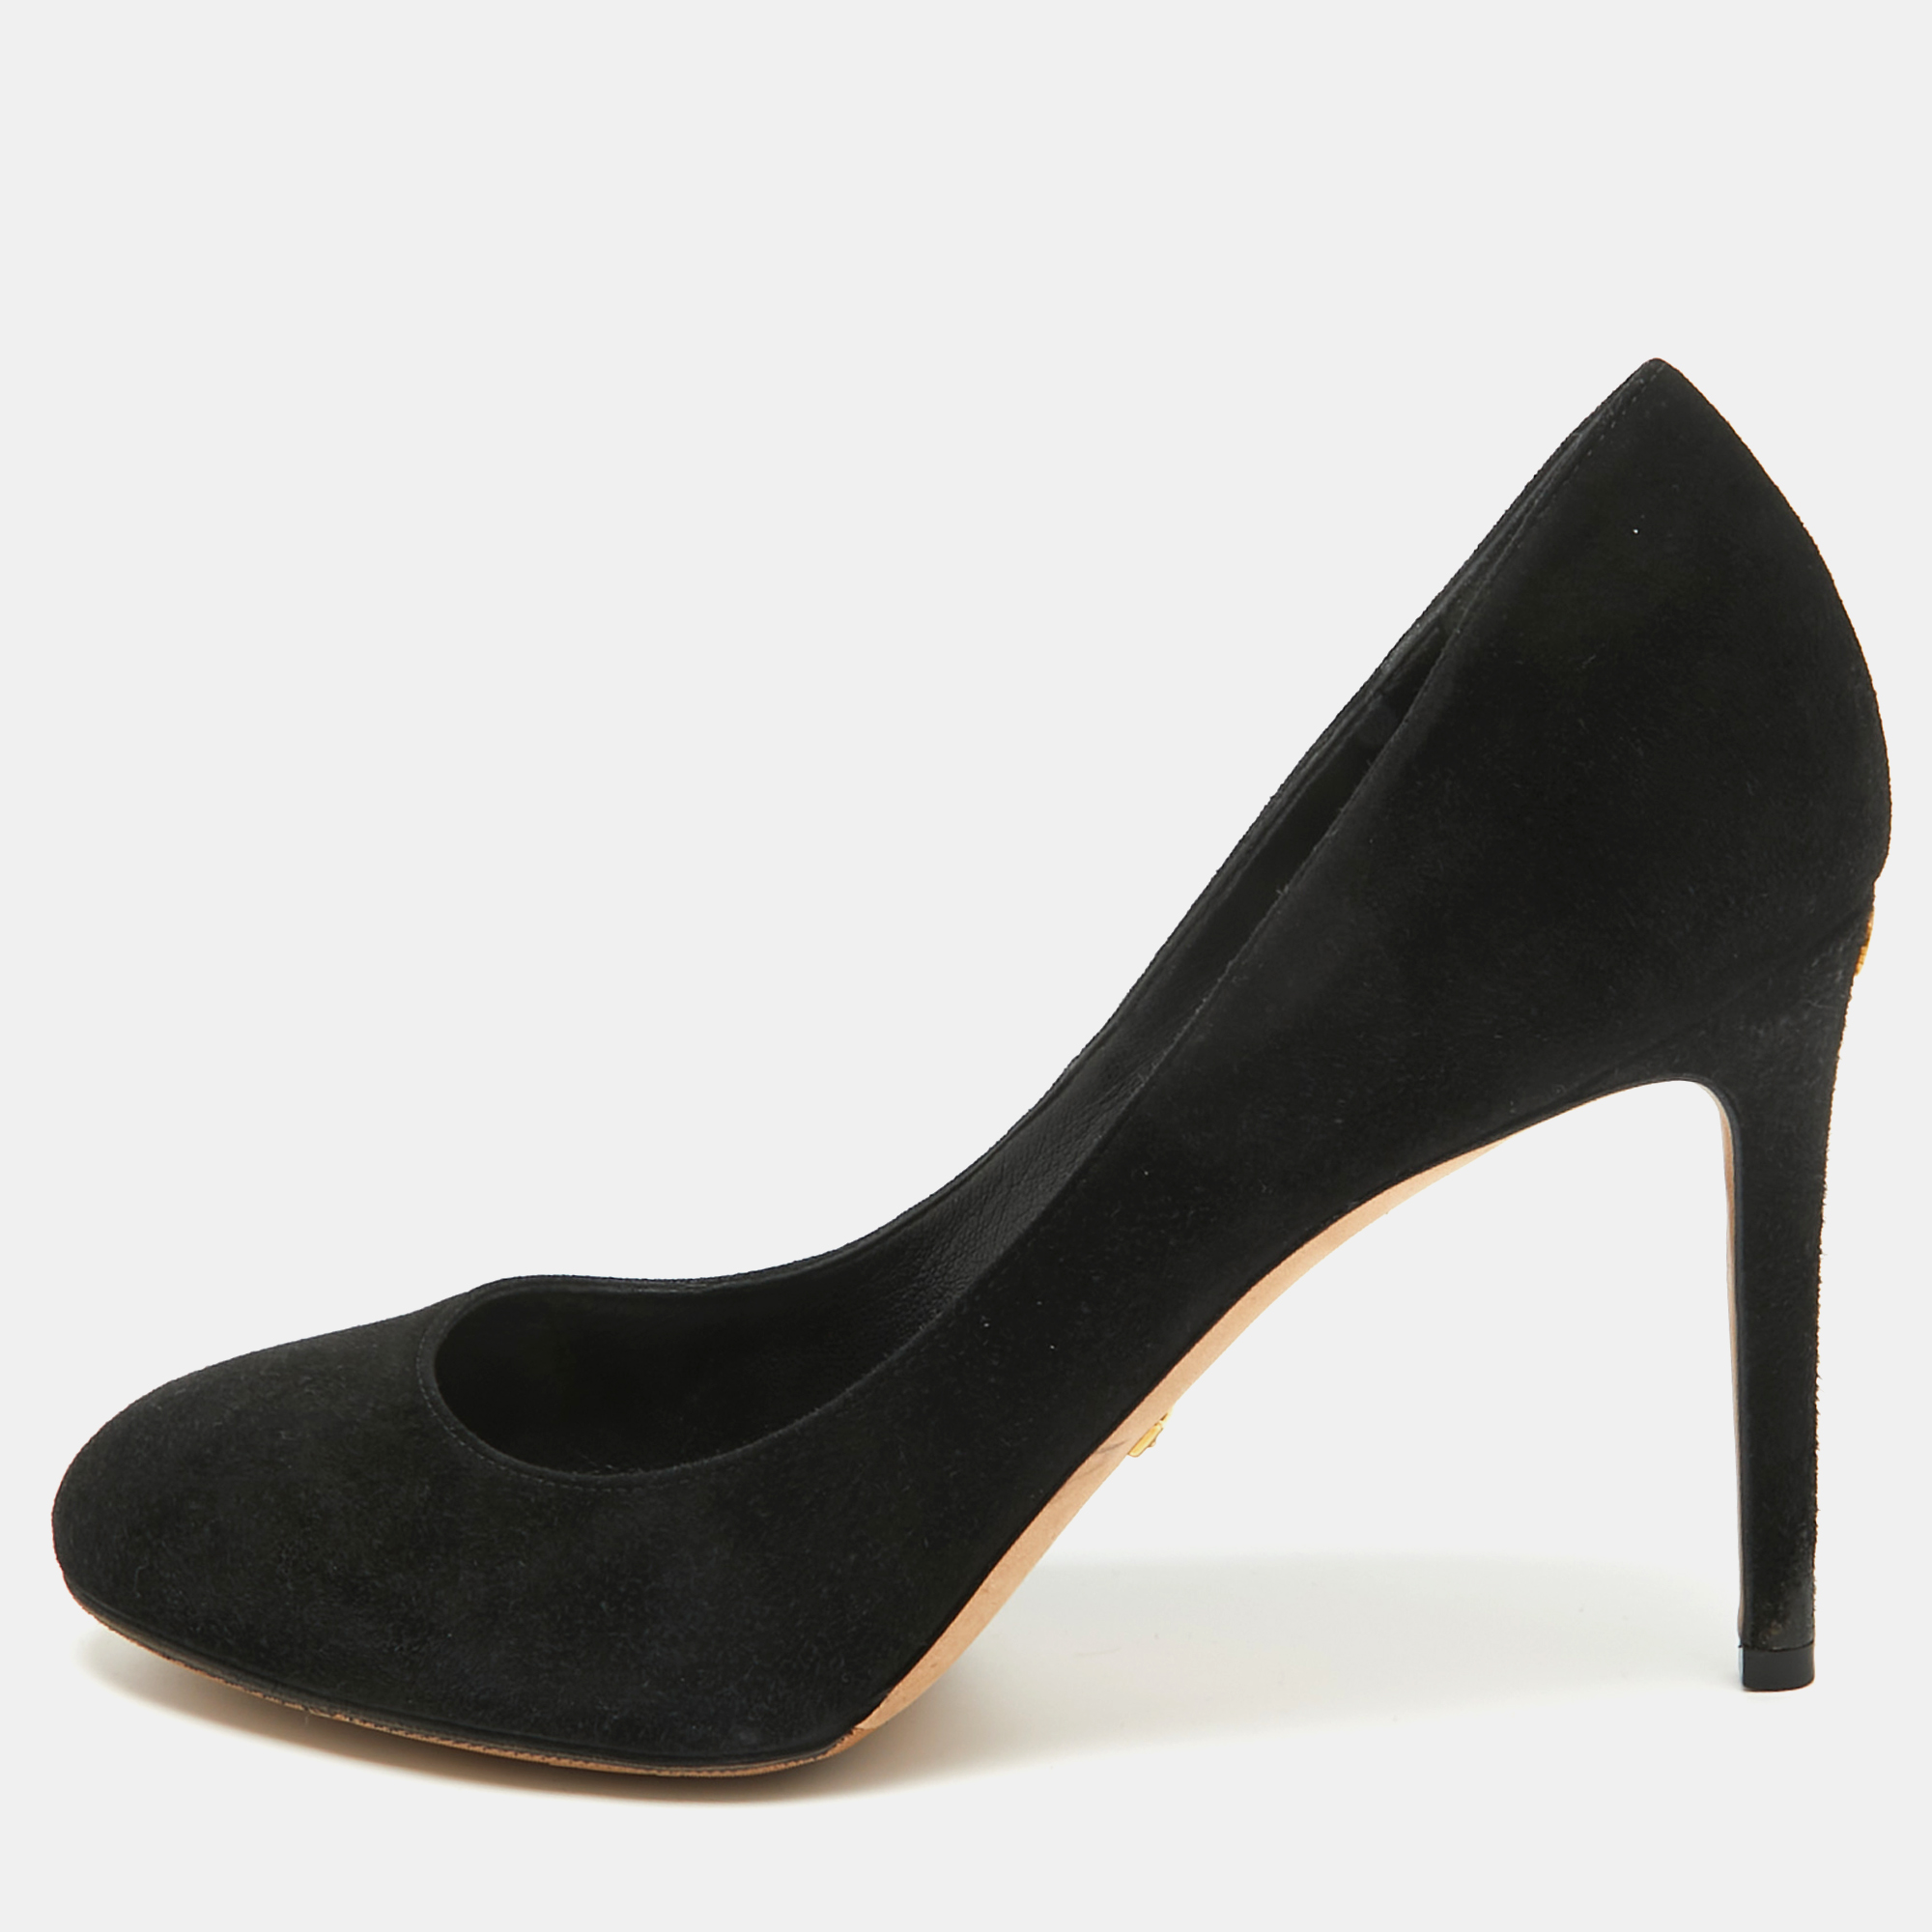 Pre-owned Gucci Black Suede Round Toe Pumps Size 38.5